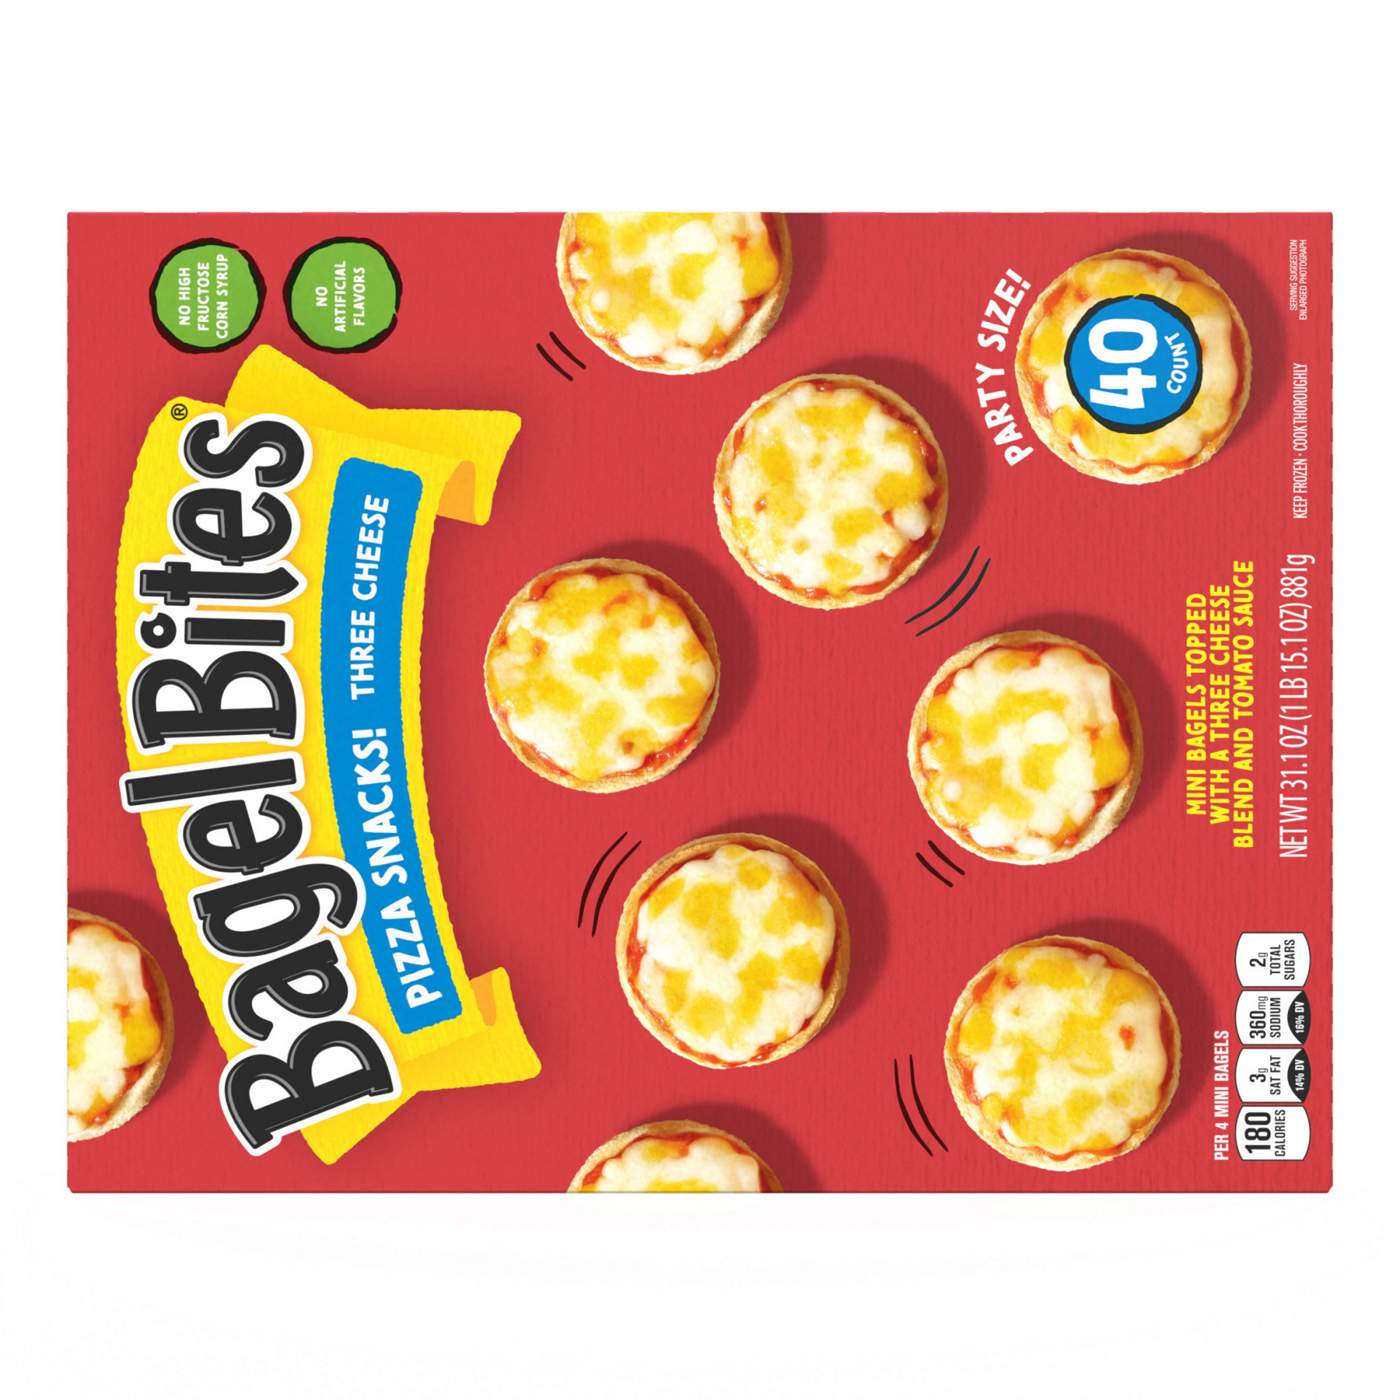 Bagel Bites Three Cheese Mini Bagels Party Size; image 2 of 9